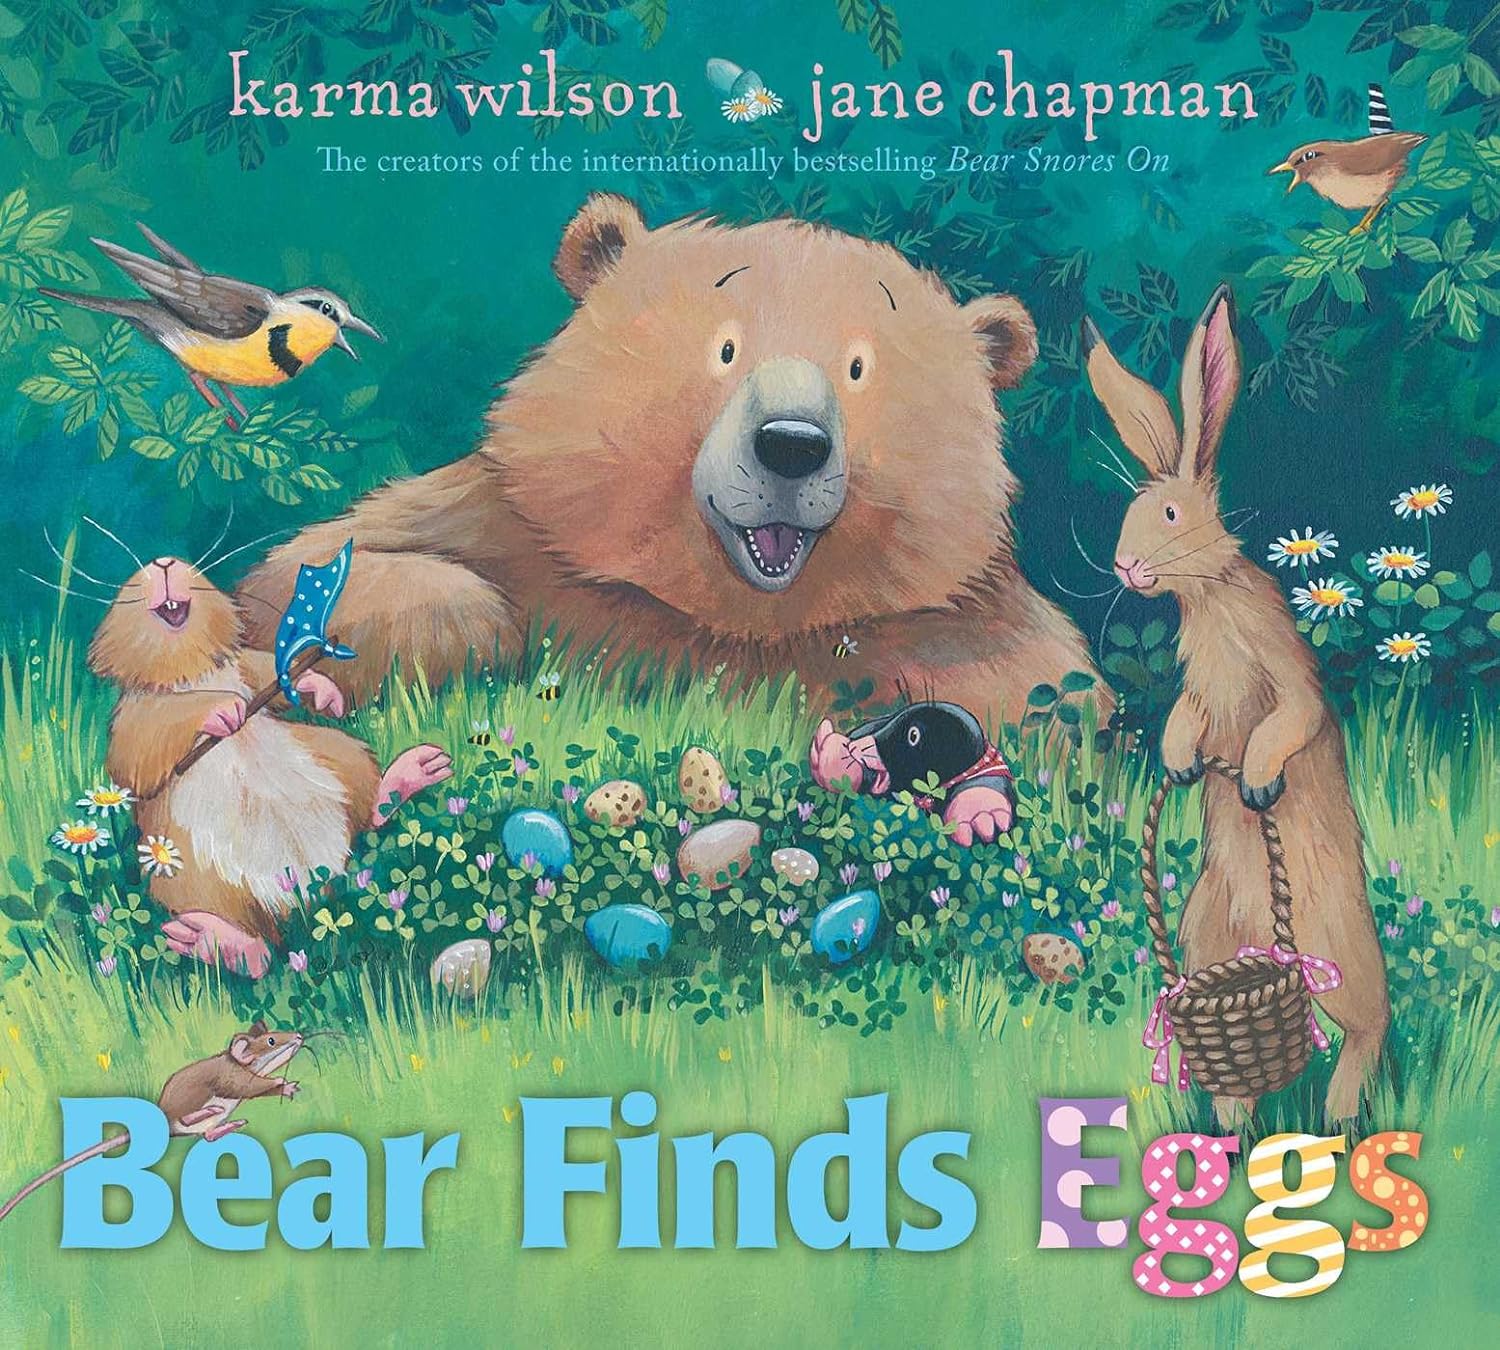 Image for "Bear Finds Eggs"